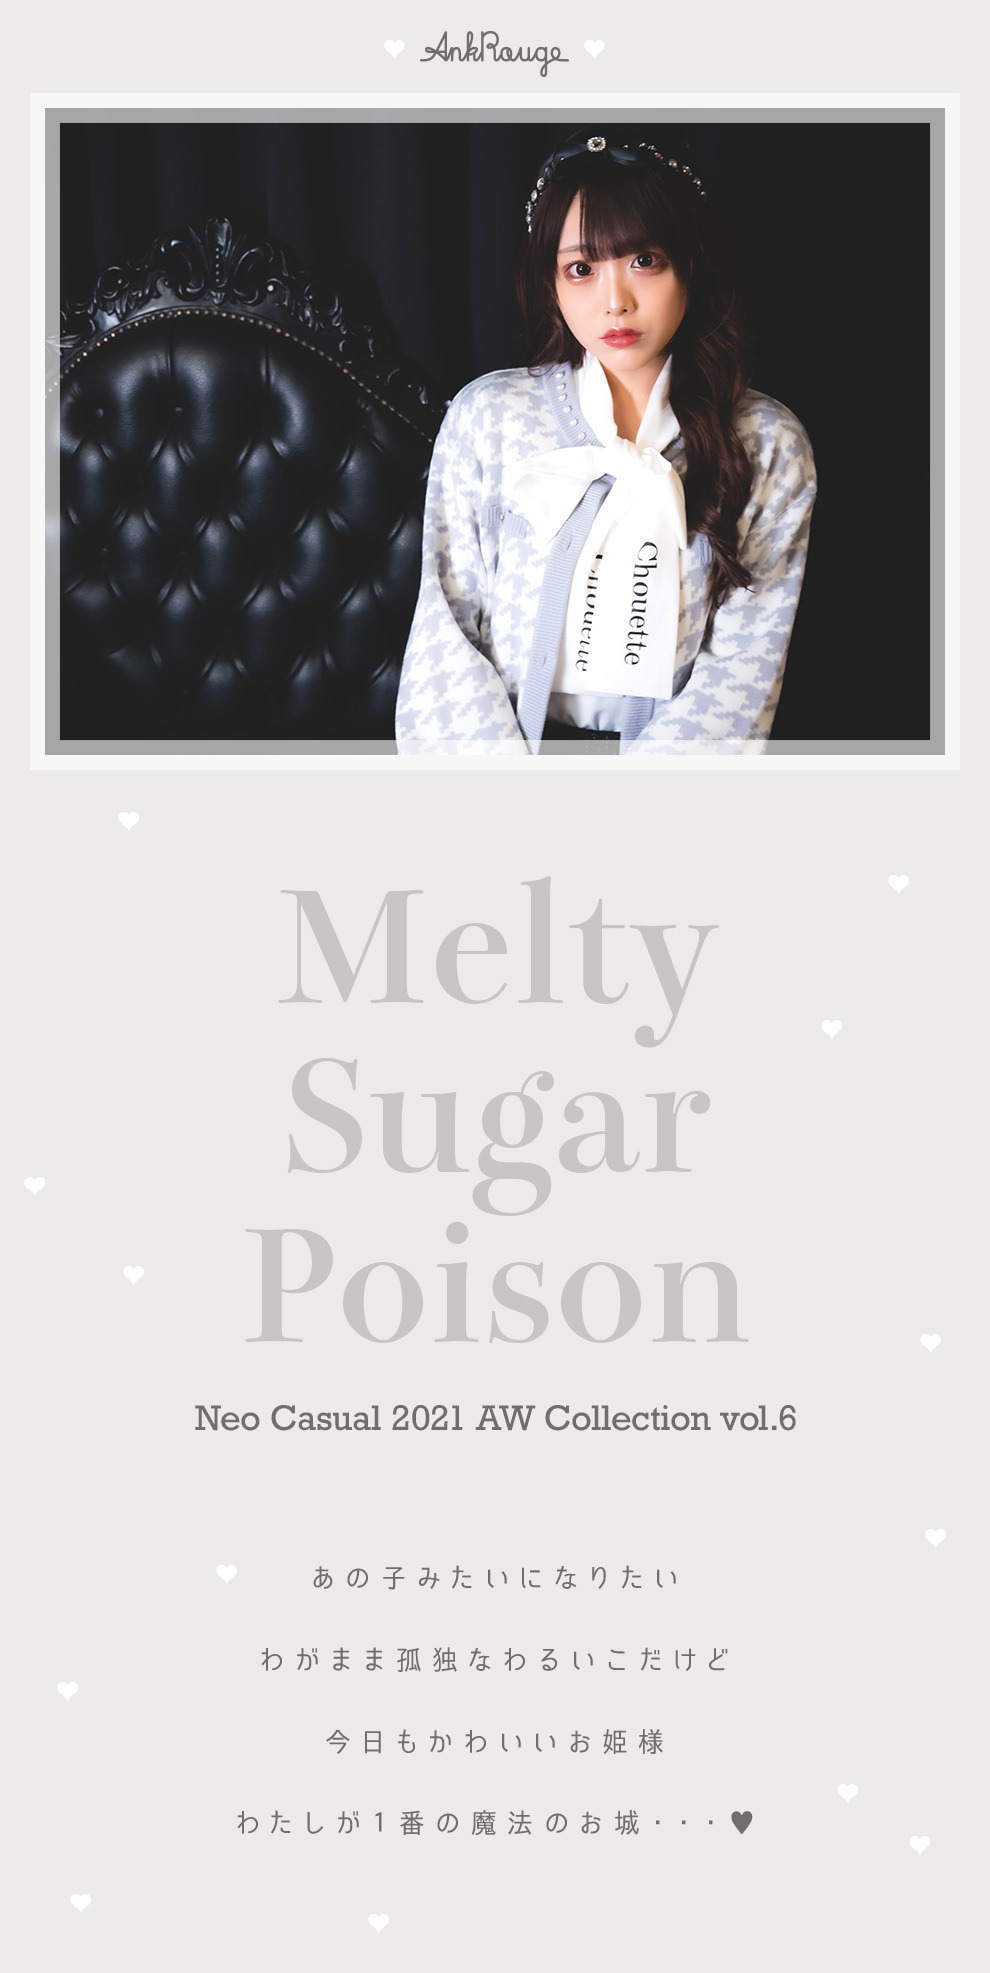 Neo Casual 2021 AW Collection vol.6